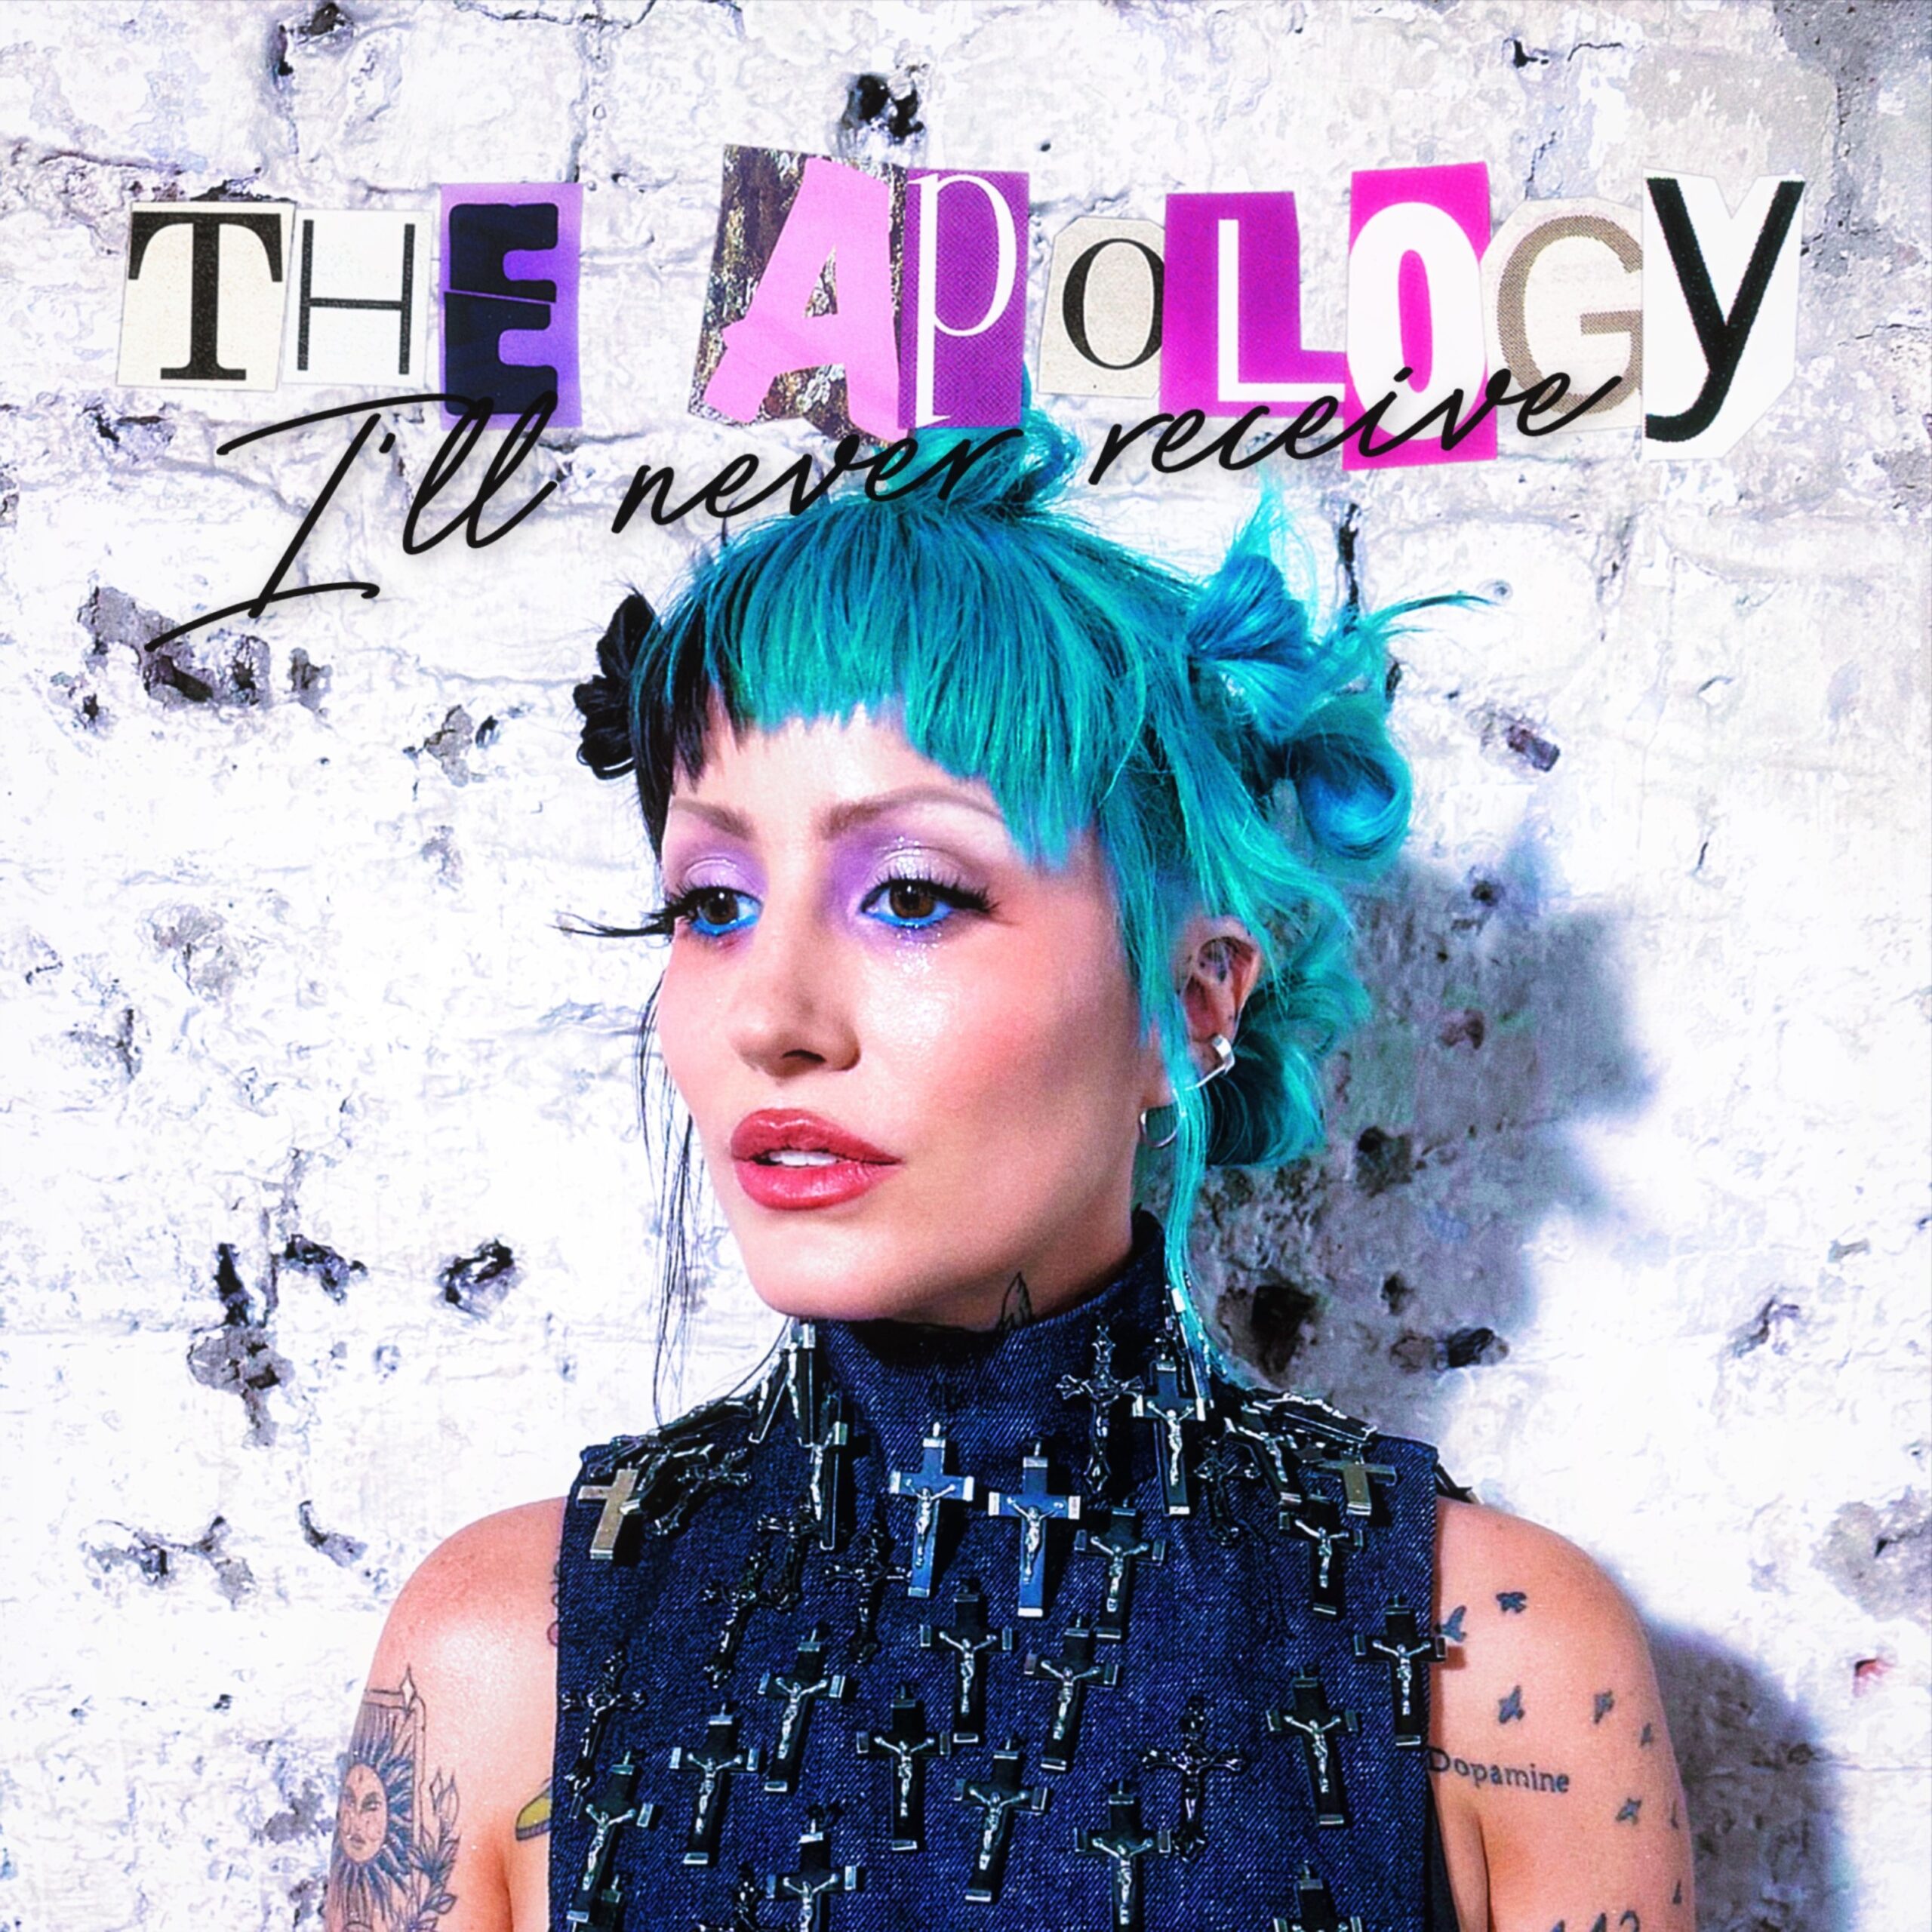 the apology ill never receive ARTWORK FINAL scaled